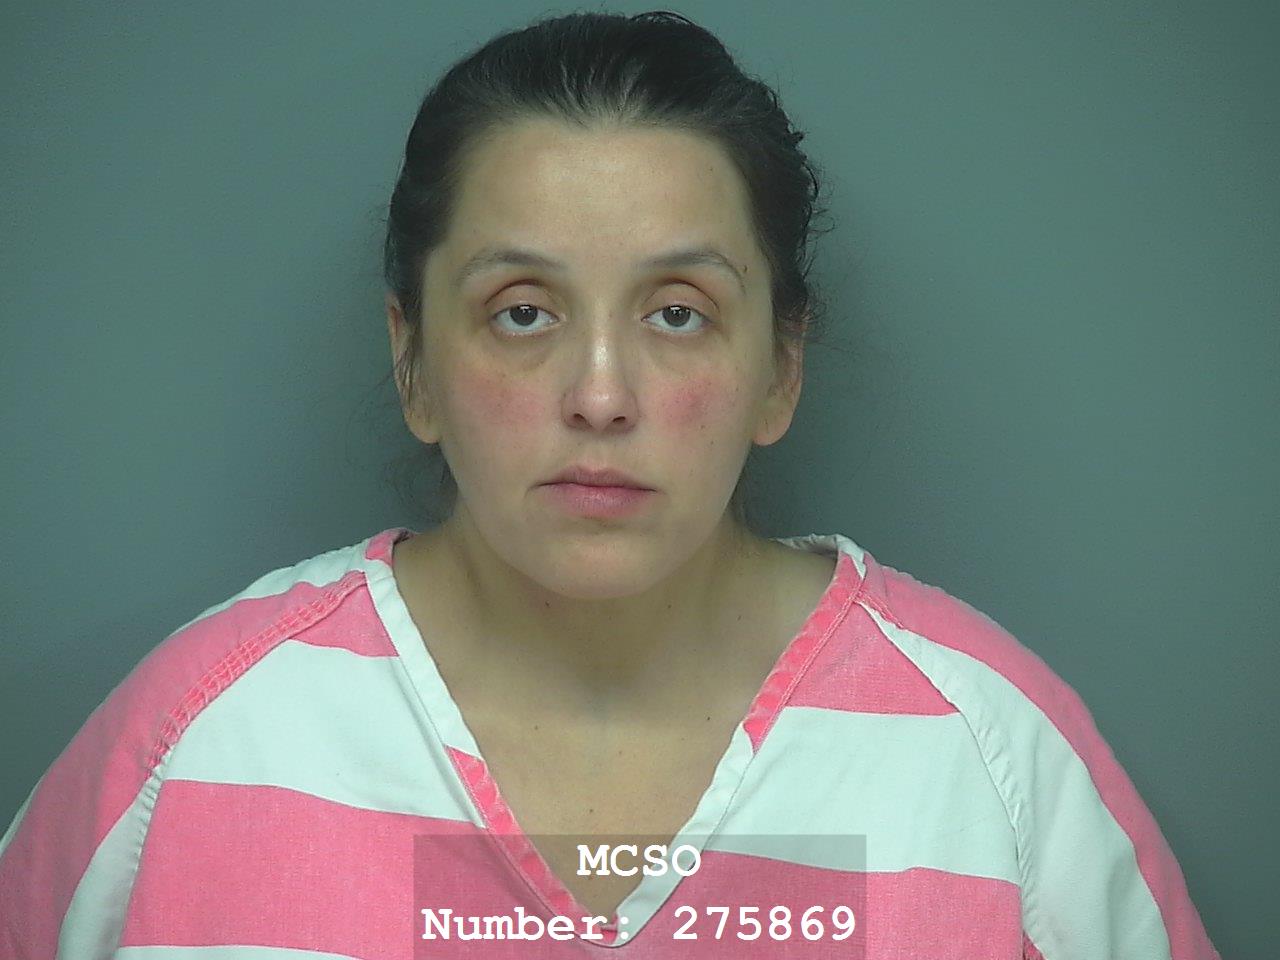 MONTGOMERY COUNTY JAIL BOOKINGS FOR 6/8/19